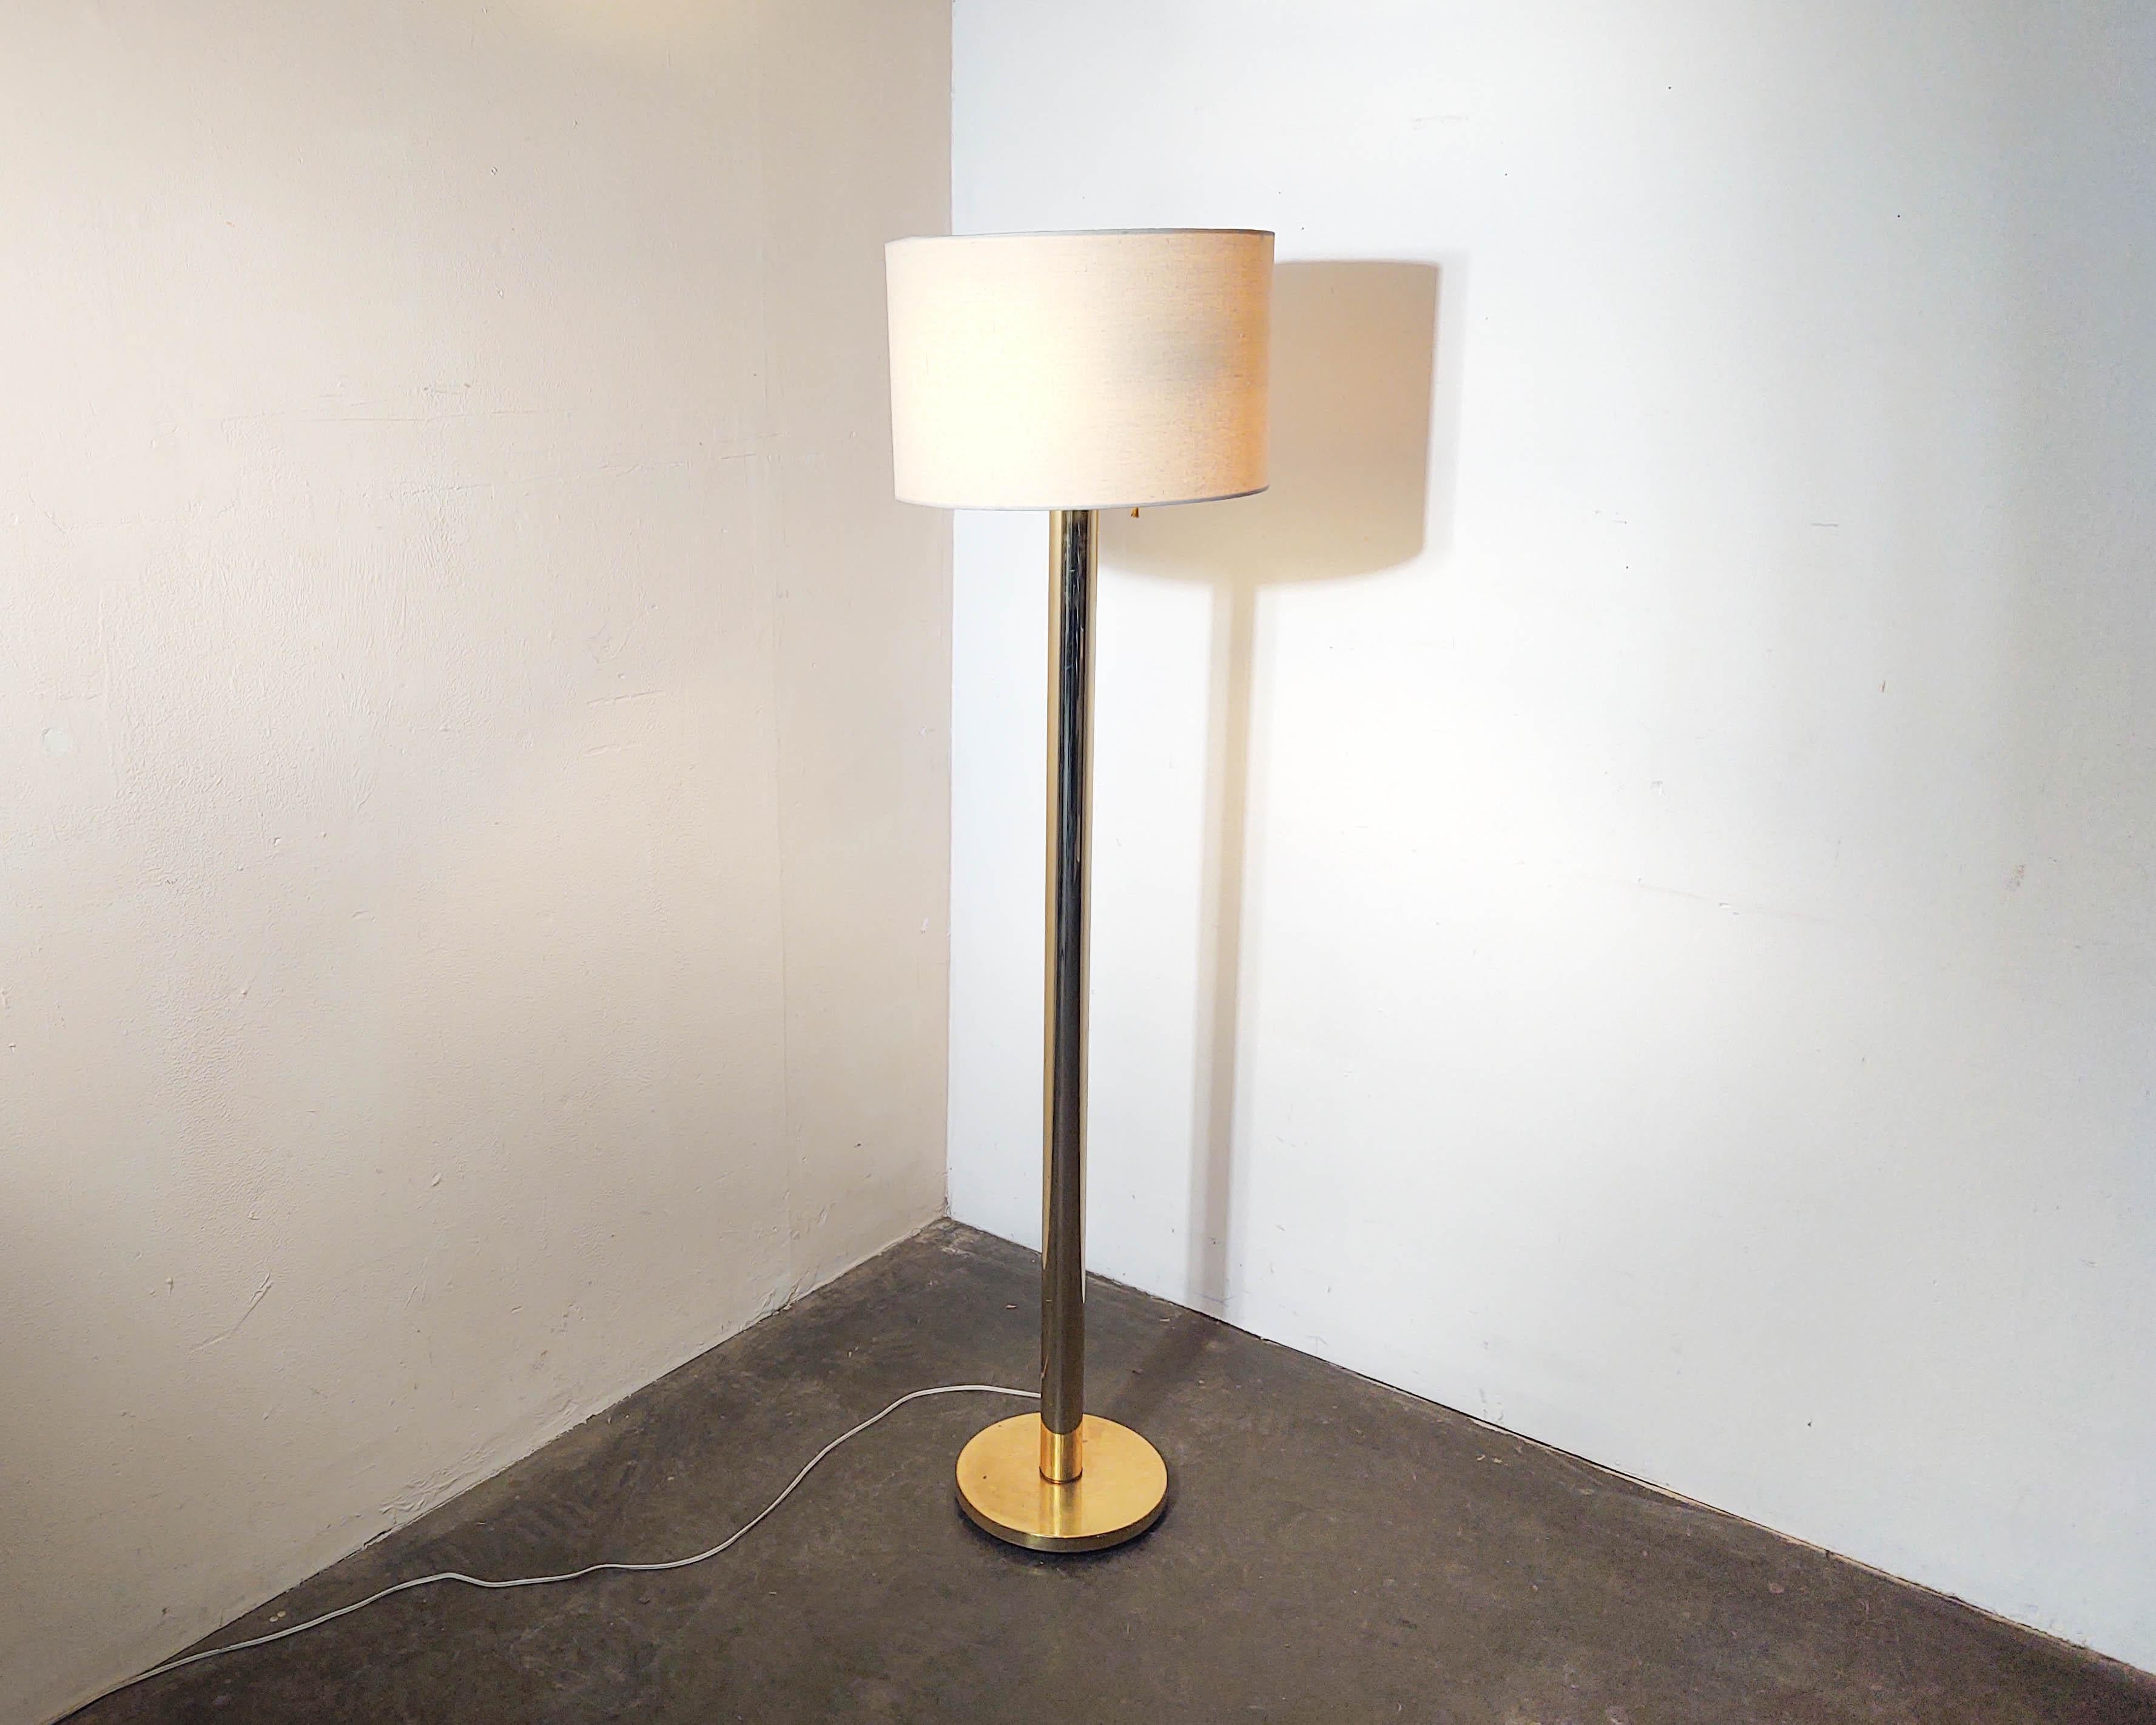 Minimal brass column floor lamp with neutral woven drum shade by Koch + Lowy. Two lights with individual on/off pull chains. Overall great condition, some very light wear consistent with vintage age, interior shade lining has some cracking (hardly